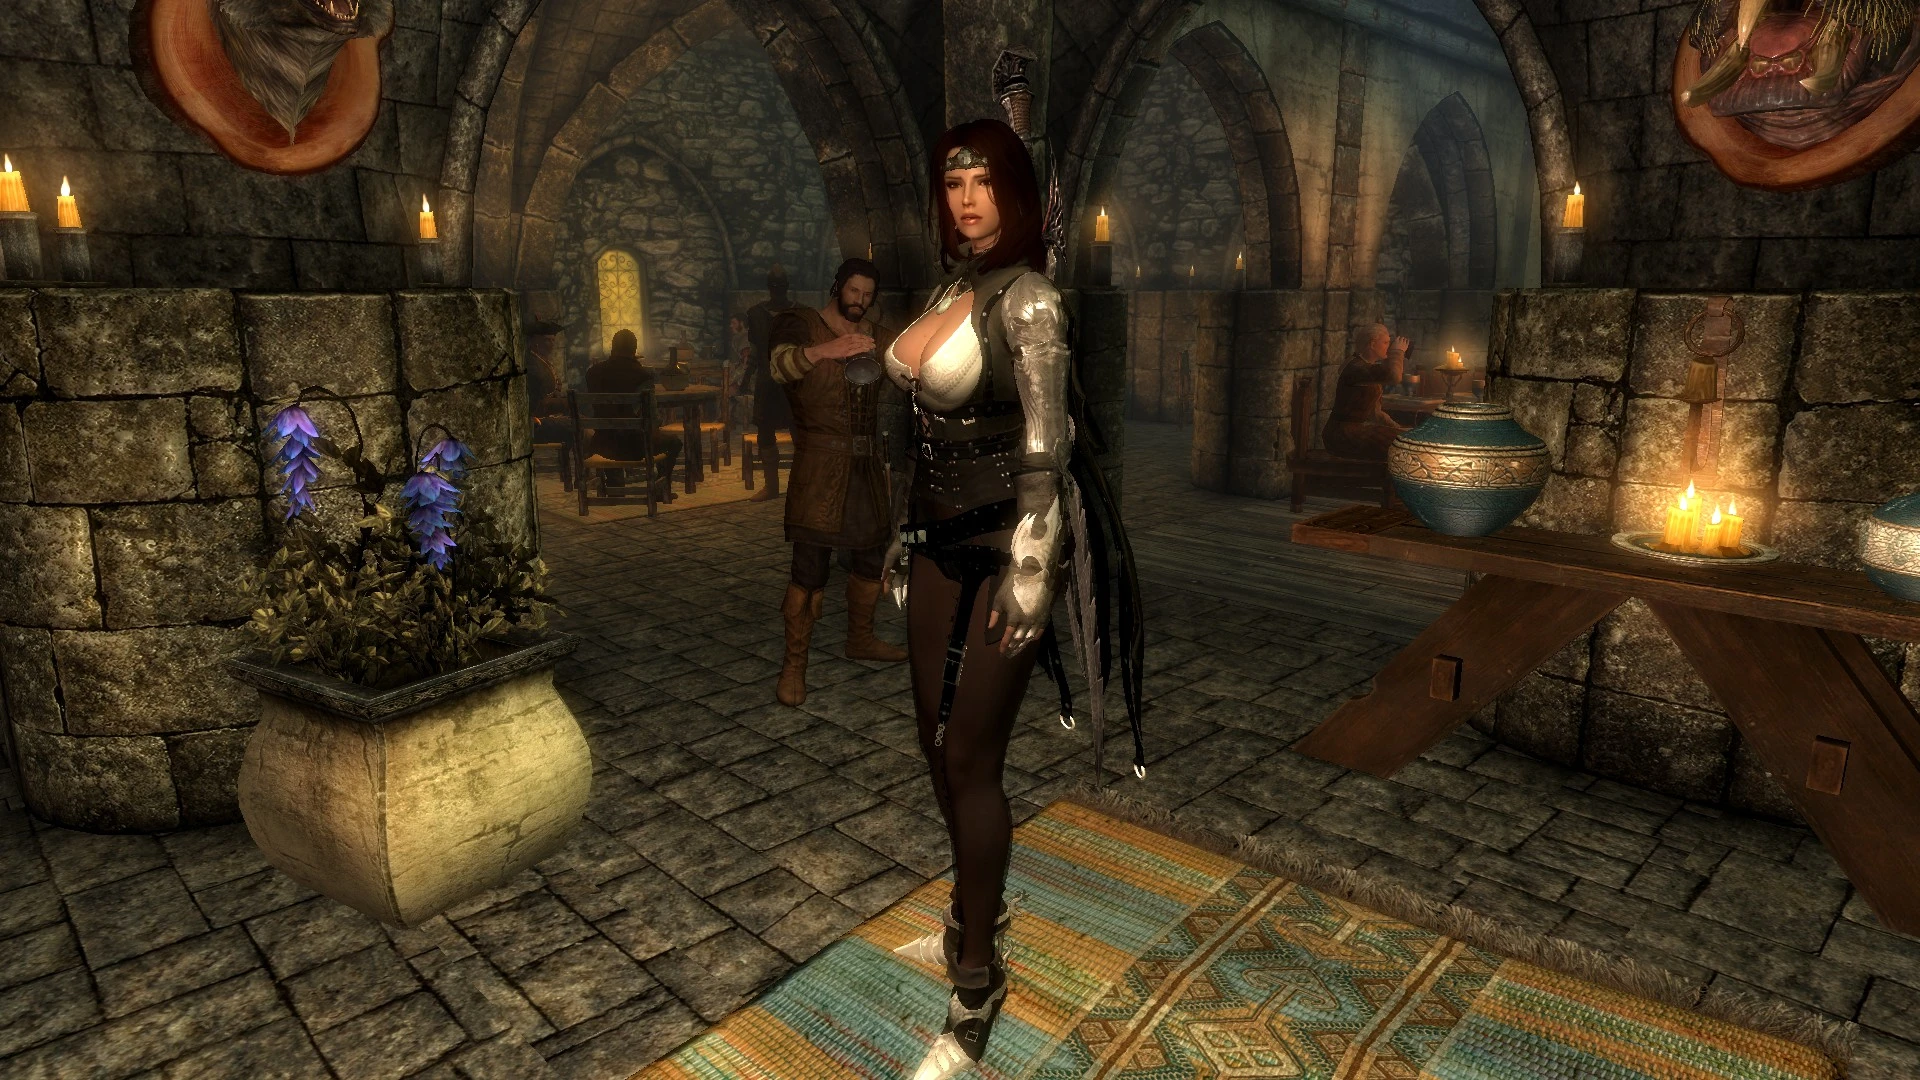 Some People Excel At karlstein armor skyrim And Some Don't - Which One Are You?